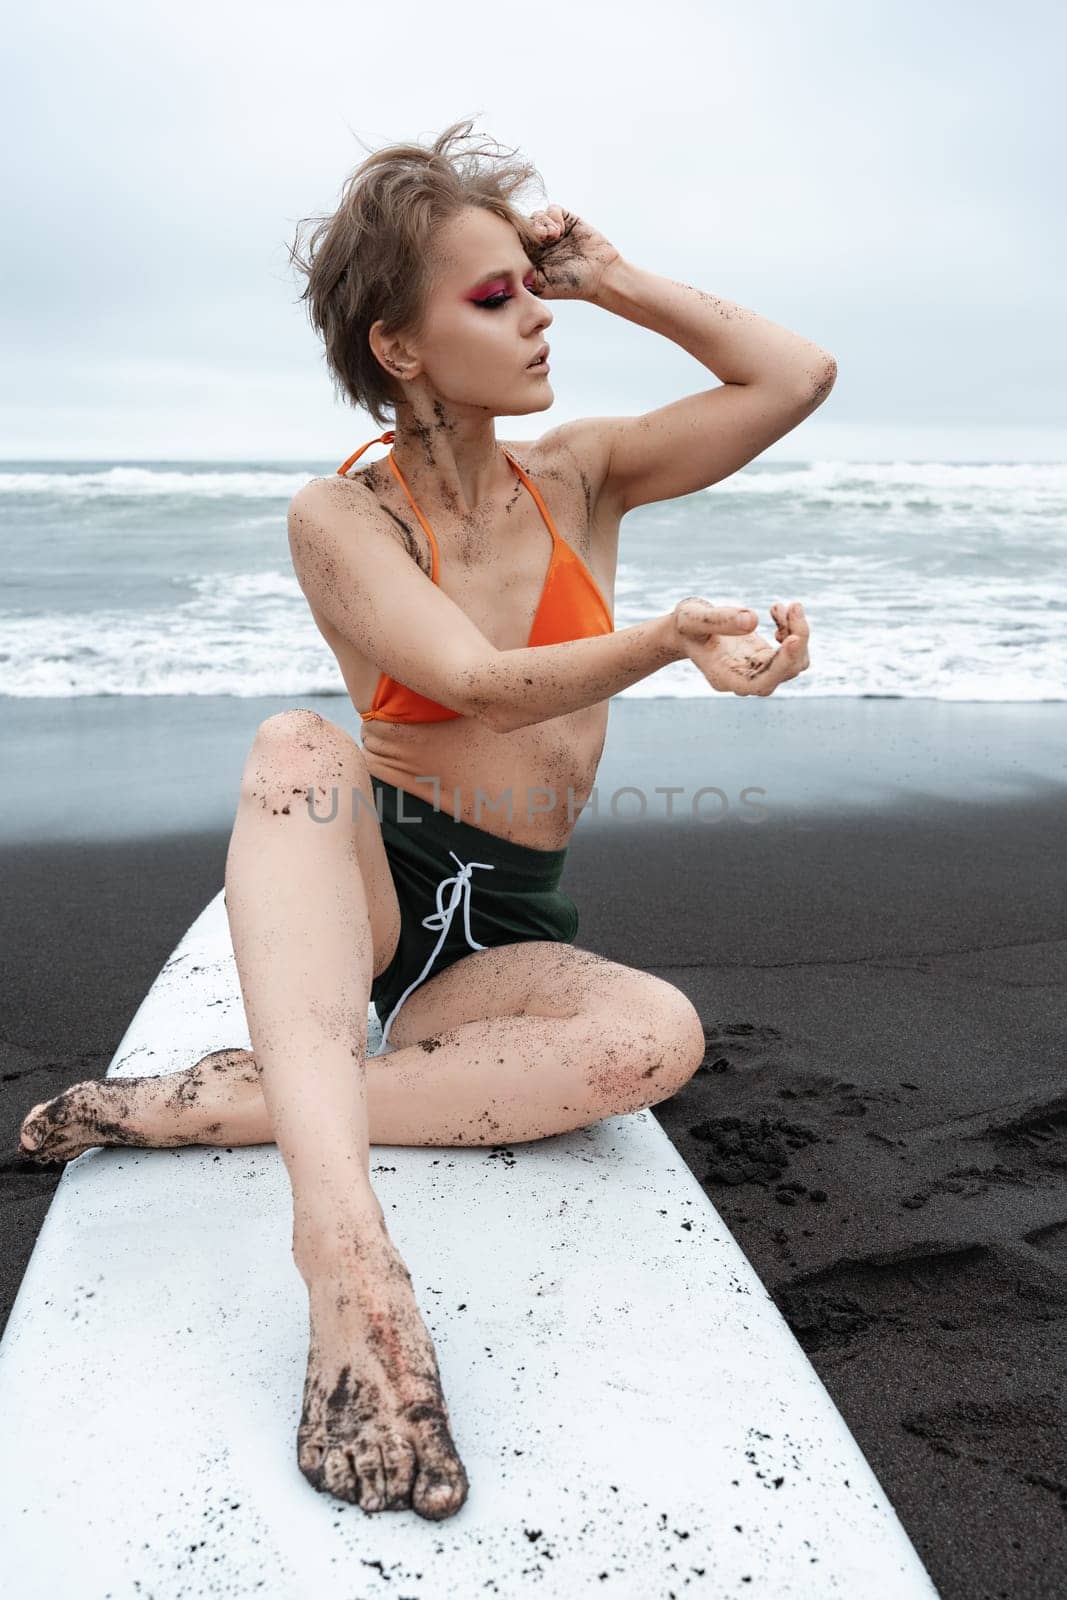 Female surfer sitting on surfboard on black sand beach with sea waves in background. She looks away, exuding authenticity. Woman dressed in bikini top and shorts, and scene is both sexy and athletic